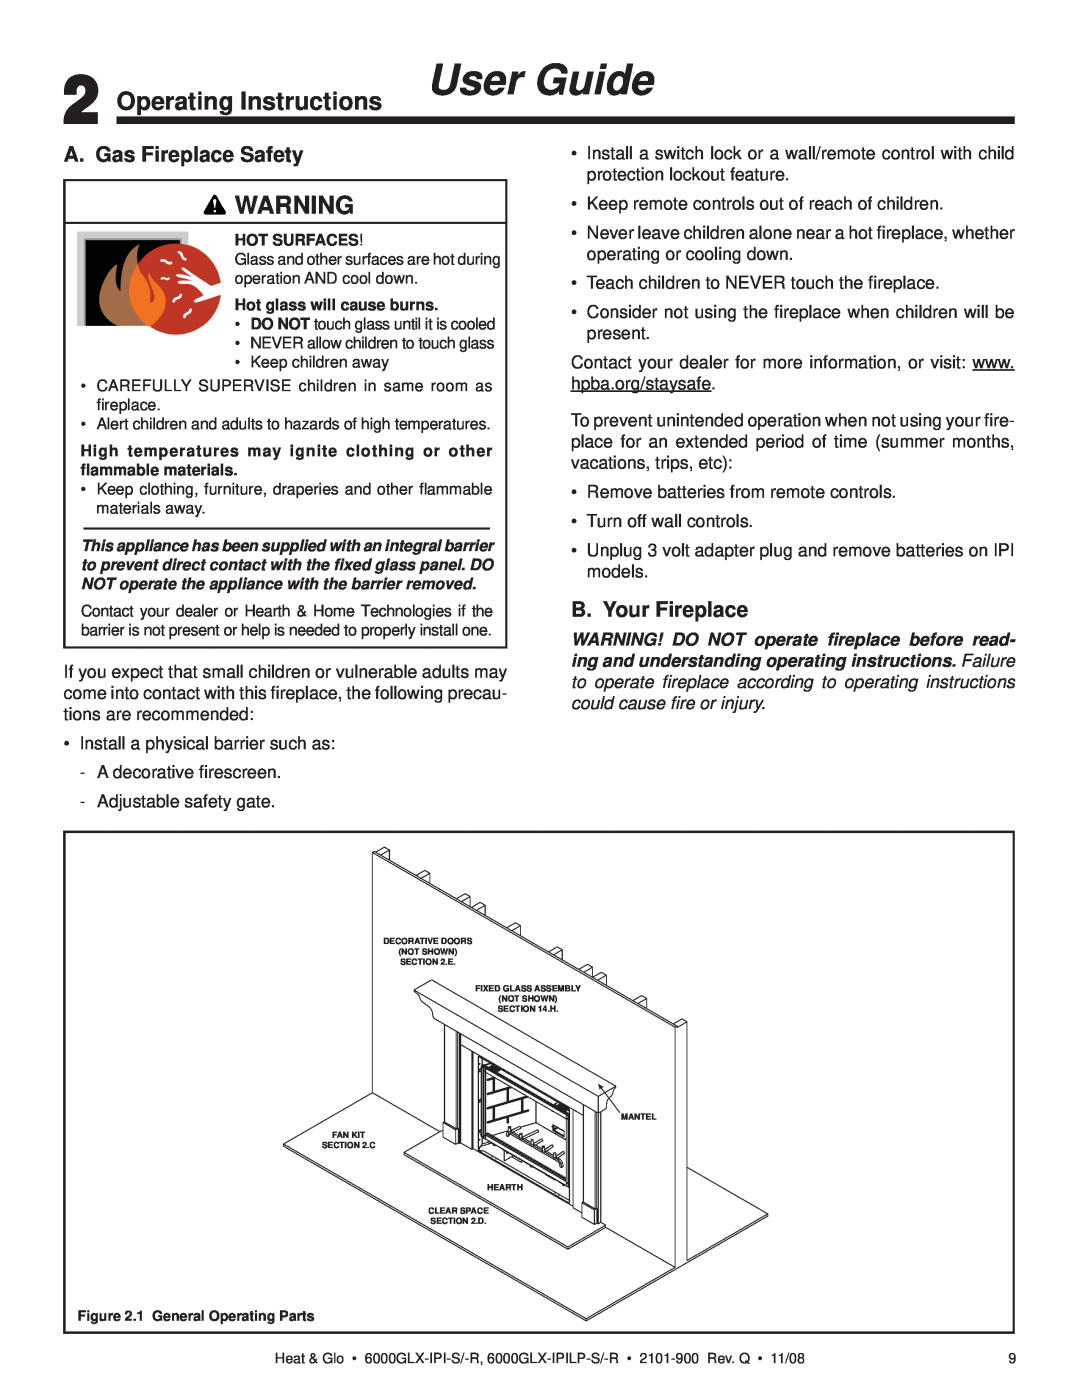 Heat & Glo LifeStyle 6000GLX-IPILP-S/-R Operating Instructions User Guide, A. Gas Fireplace Safety, B. Your Fireplace 